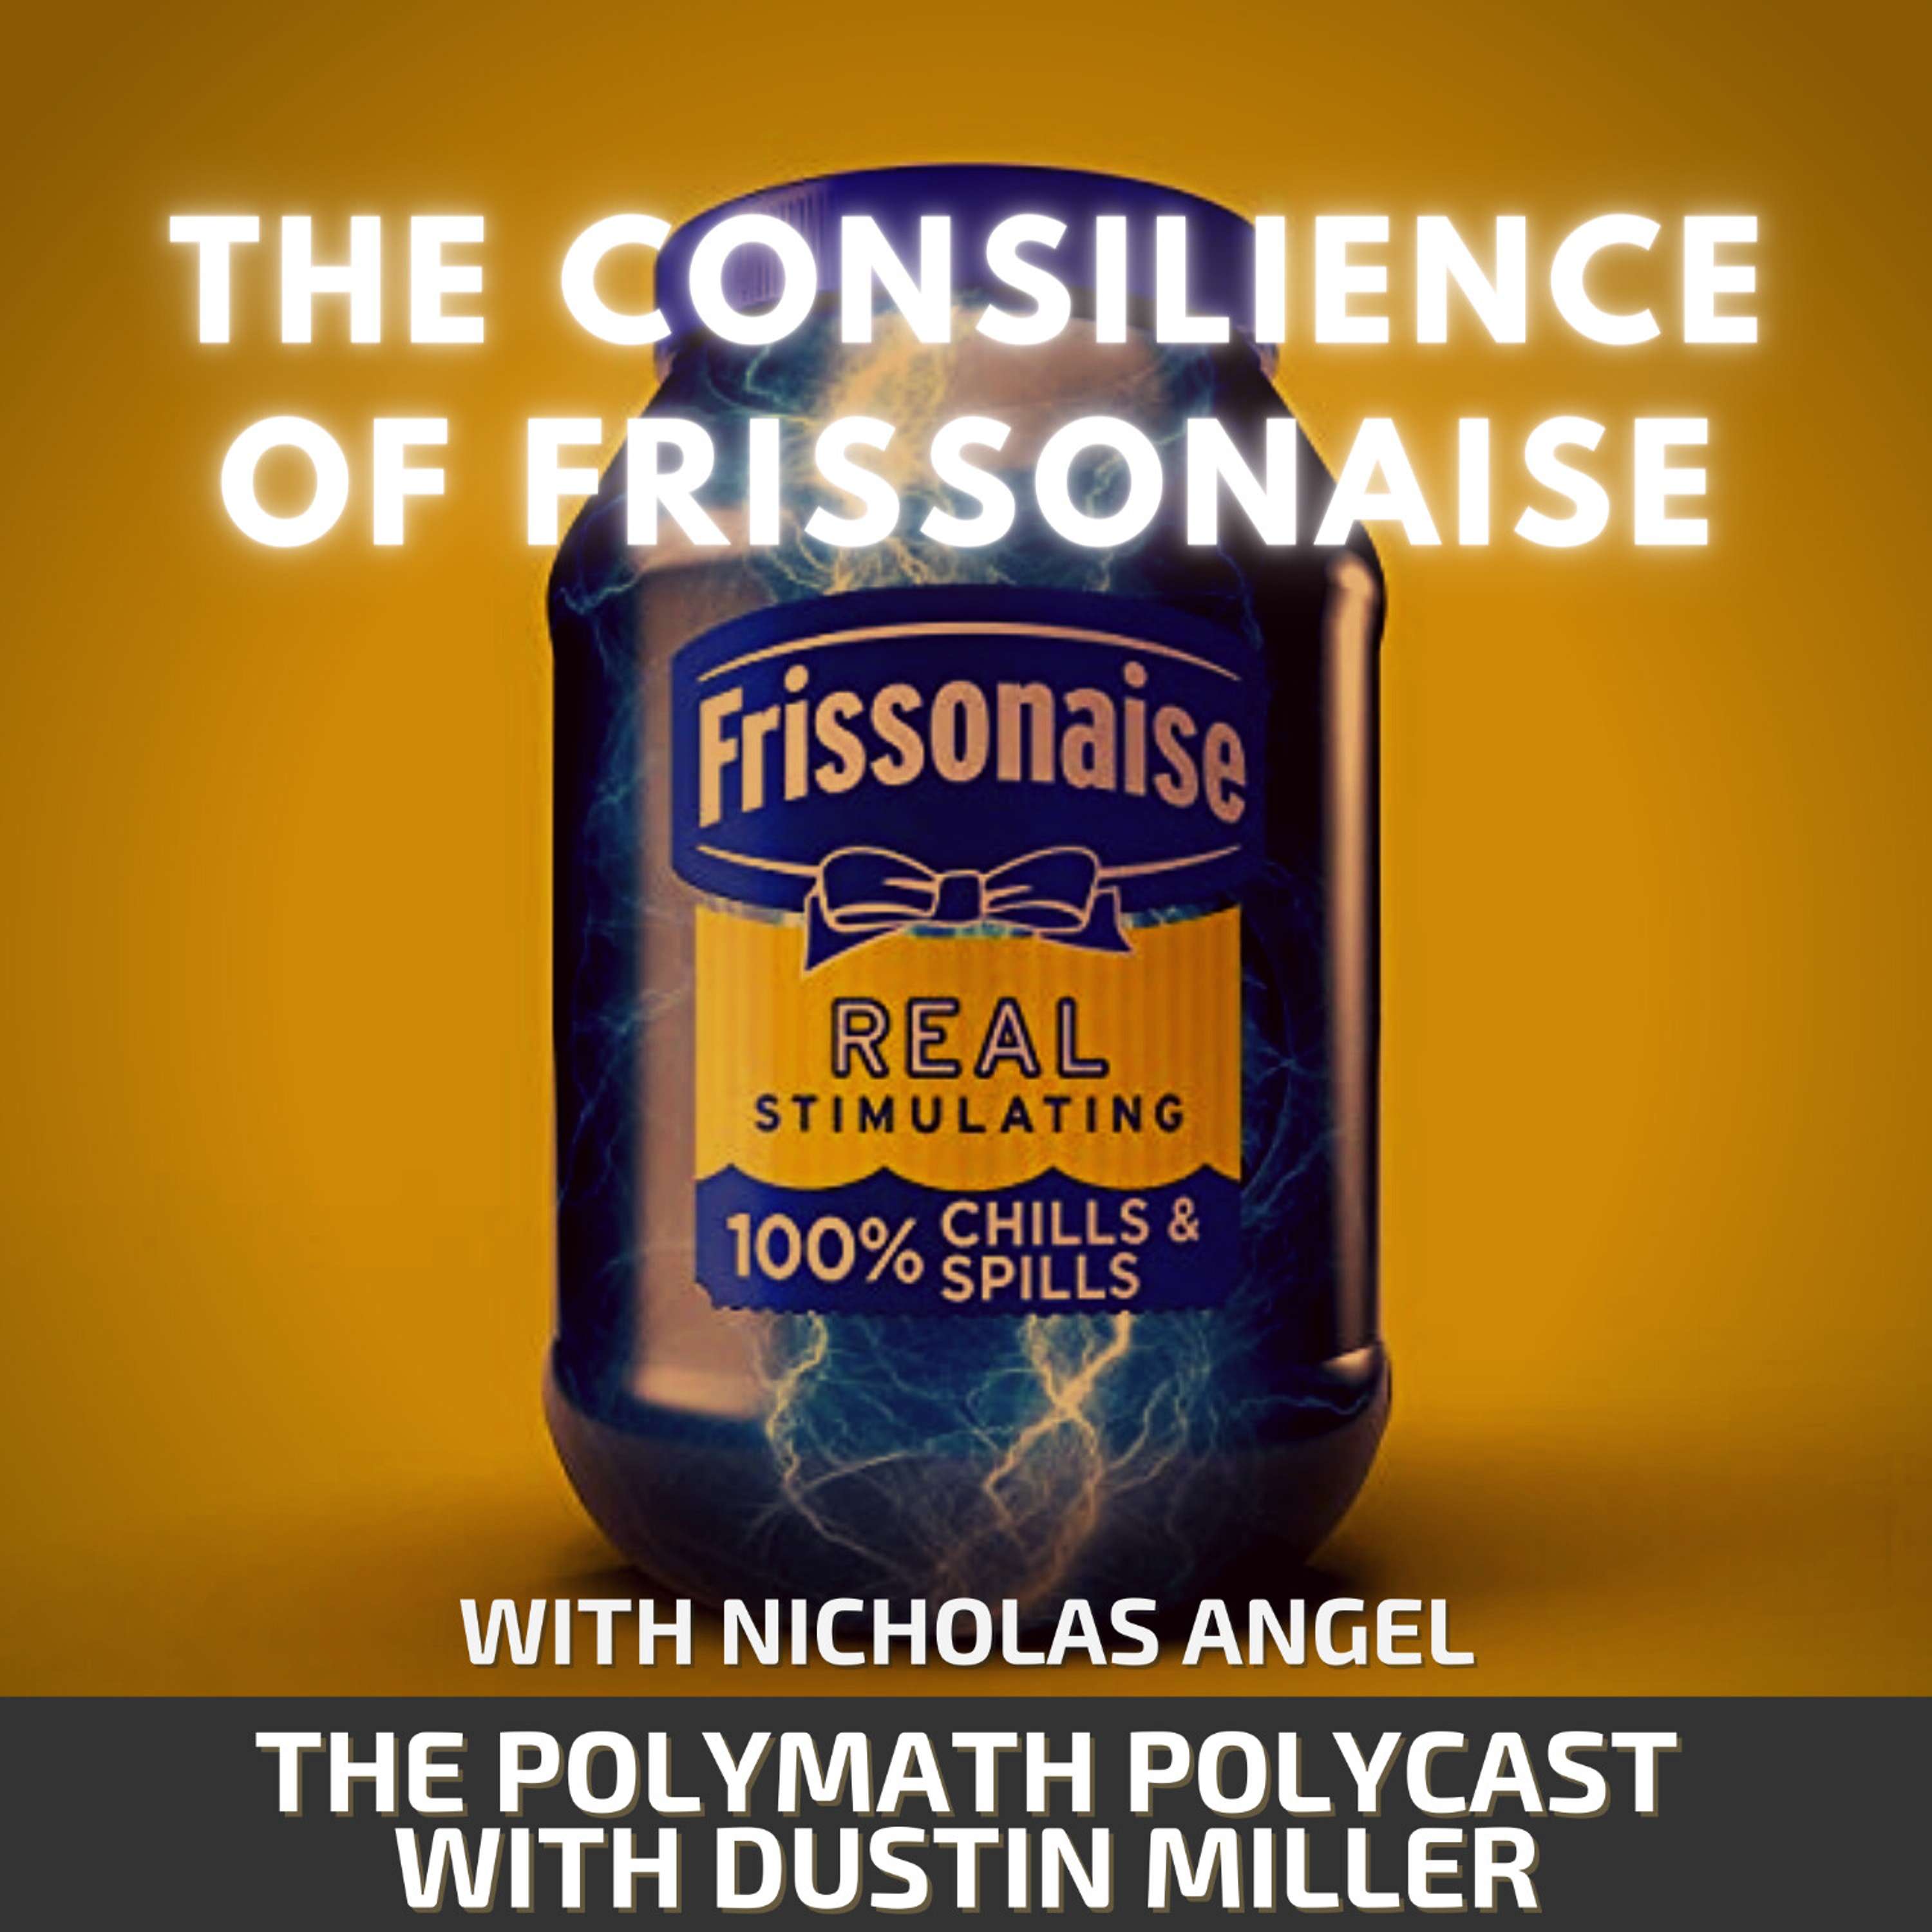 The Consilience of Frissonaise with Nicholas Angel [Interview]